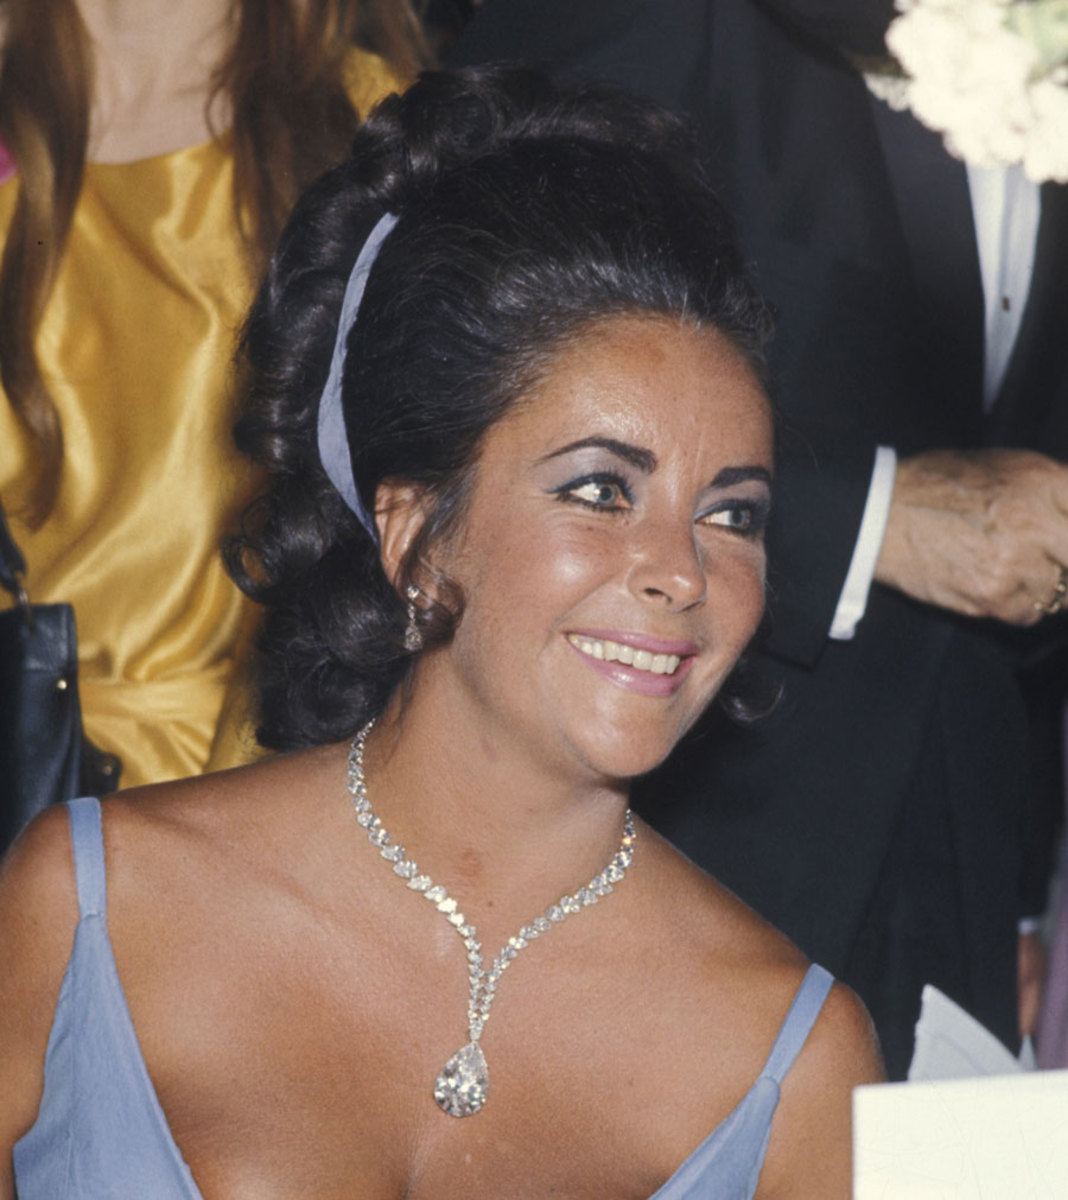 The famed diamond on the custom-made Cartier necklace made its world television debut at the 42nd annual Academy Awards in 1970.